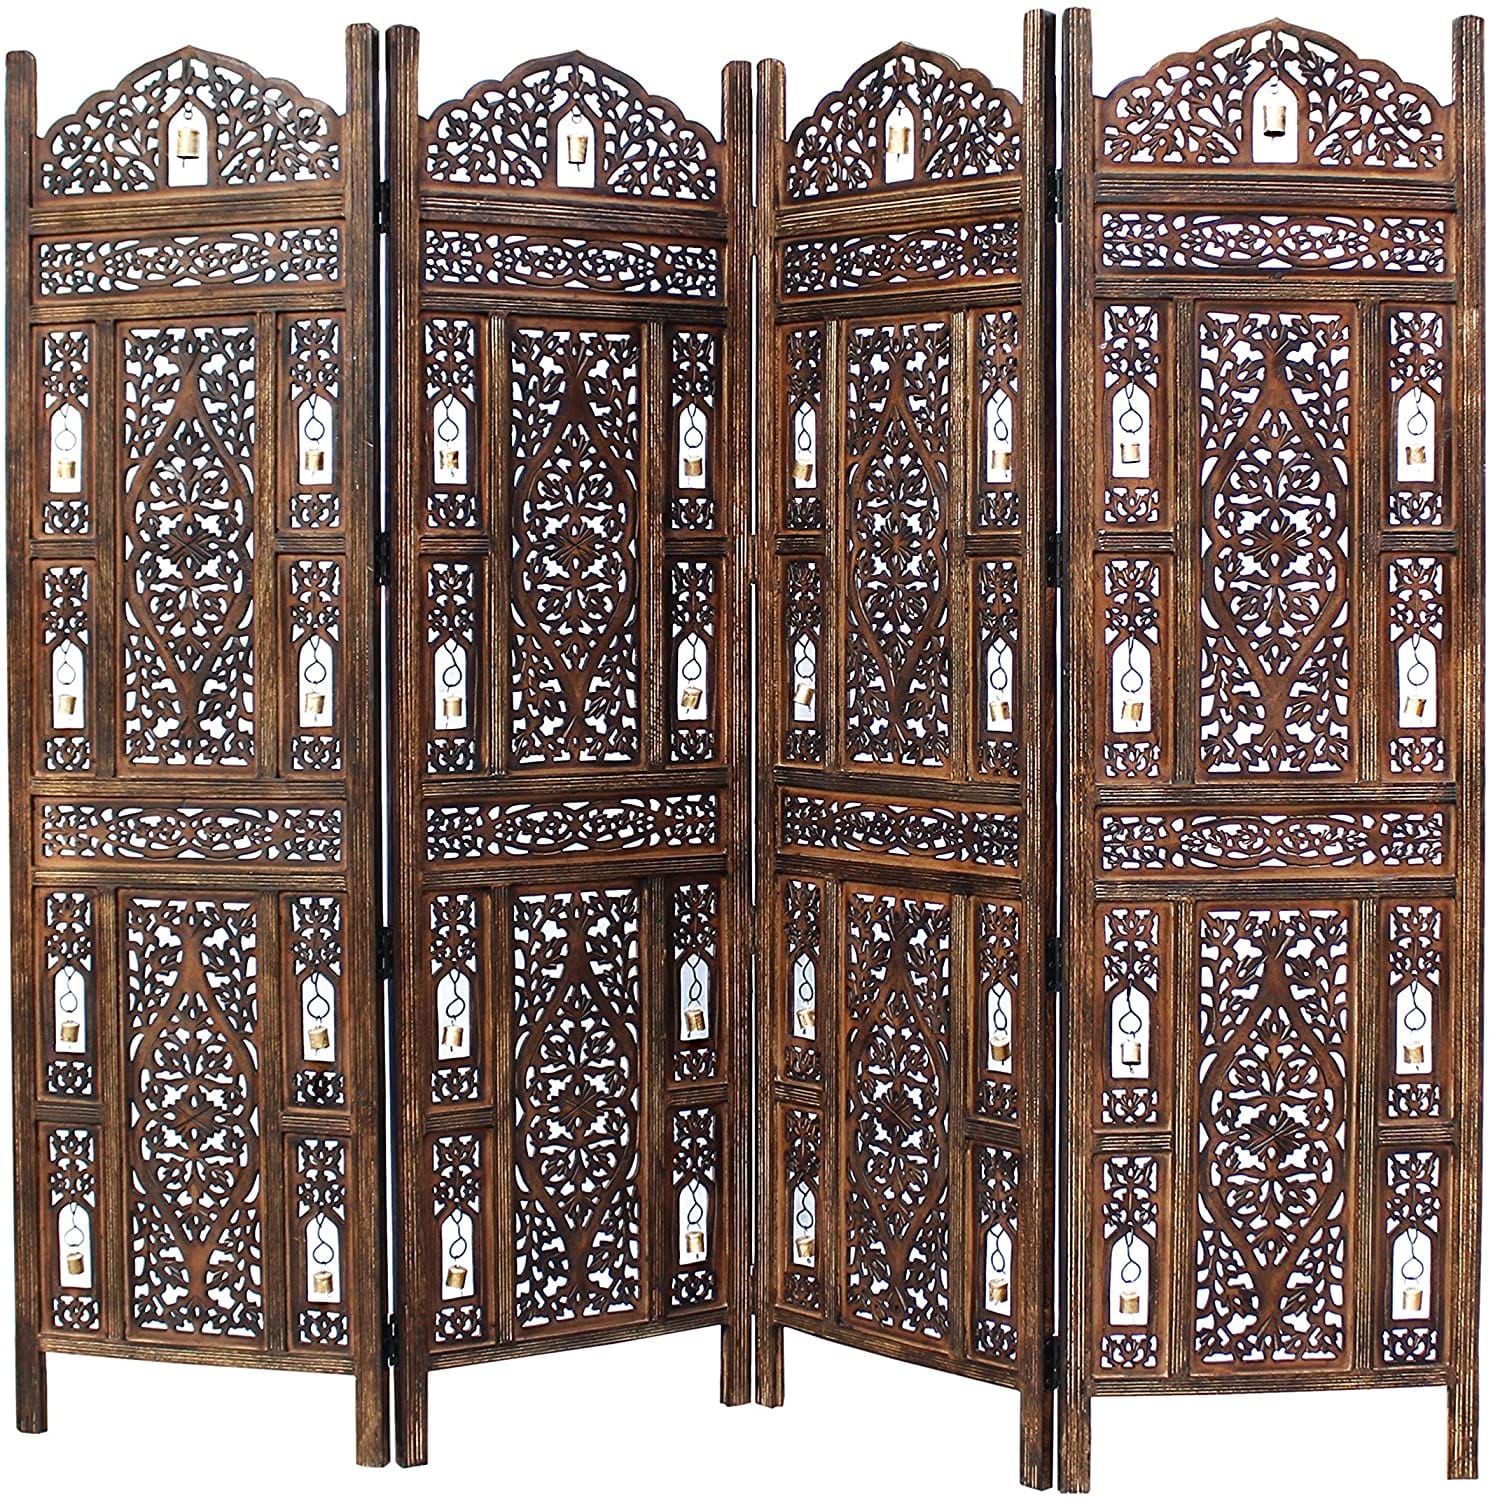 4 Panel Wooden Handcrafted Partition Room Divider Separator for Living Room Office Partition Screen Room Divider Wood Partitions for Home Kitchen & Office